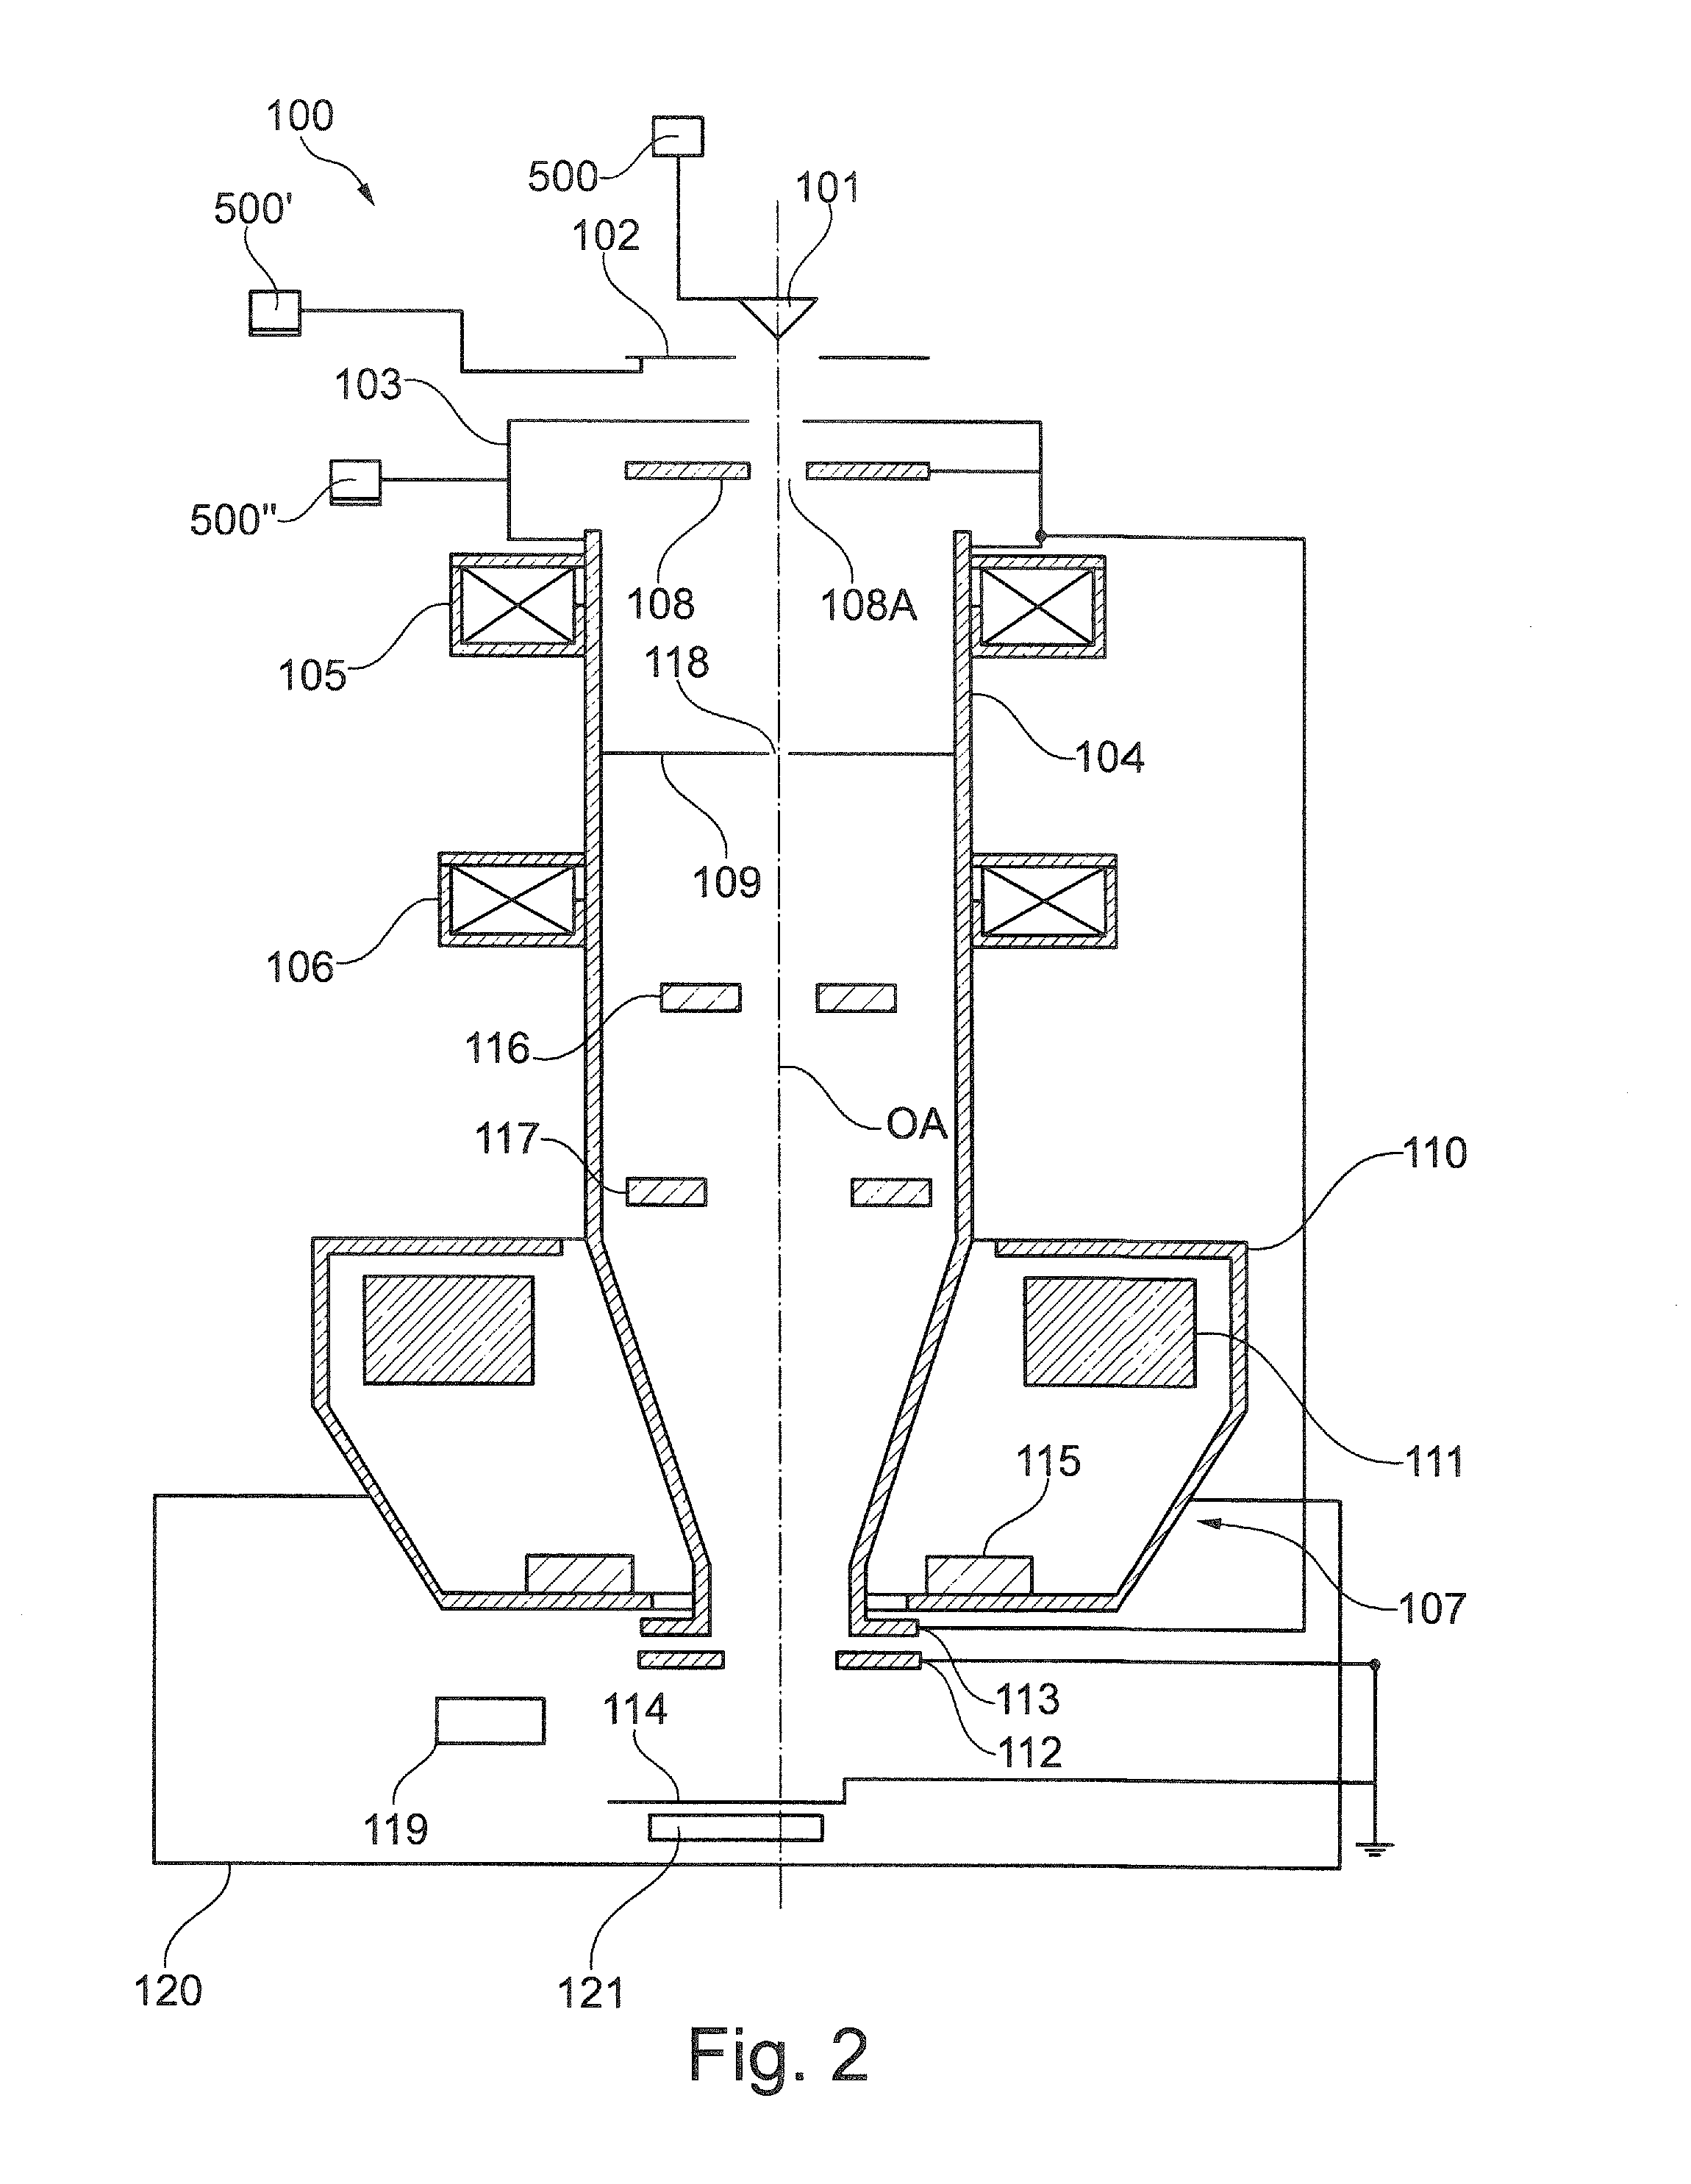 High-voltage supply unit and circuit arrangement for generating a high voltage for a particle beam apparatus